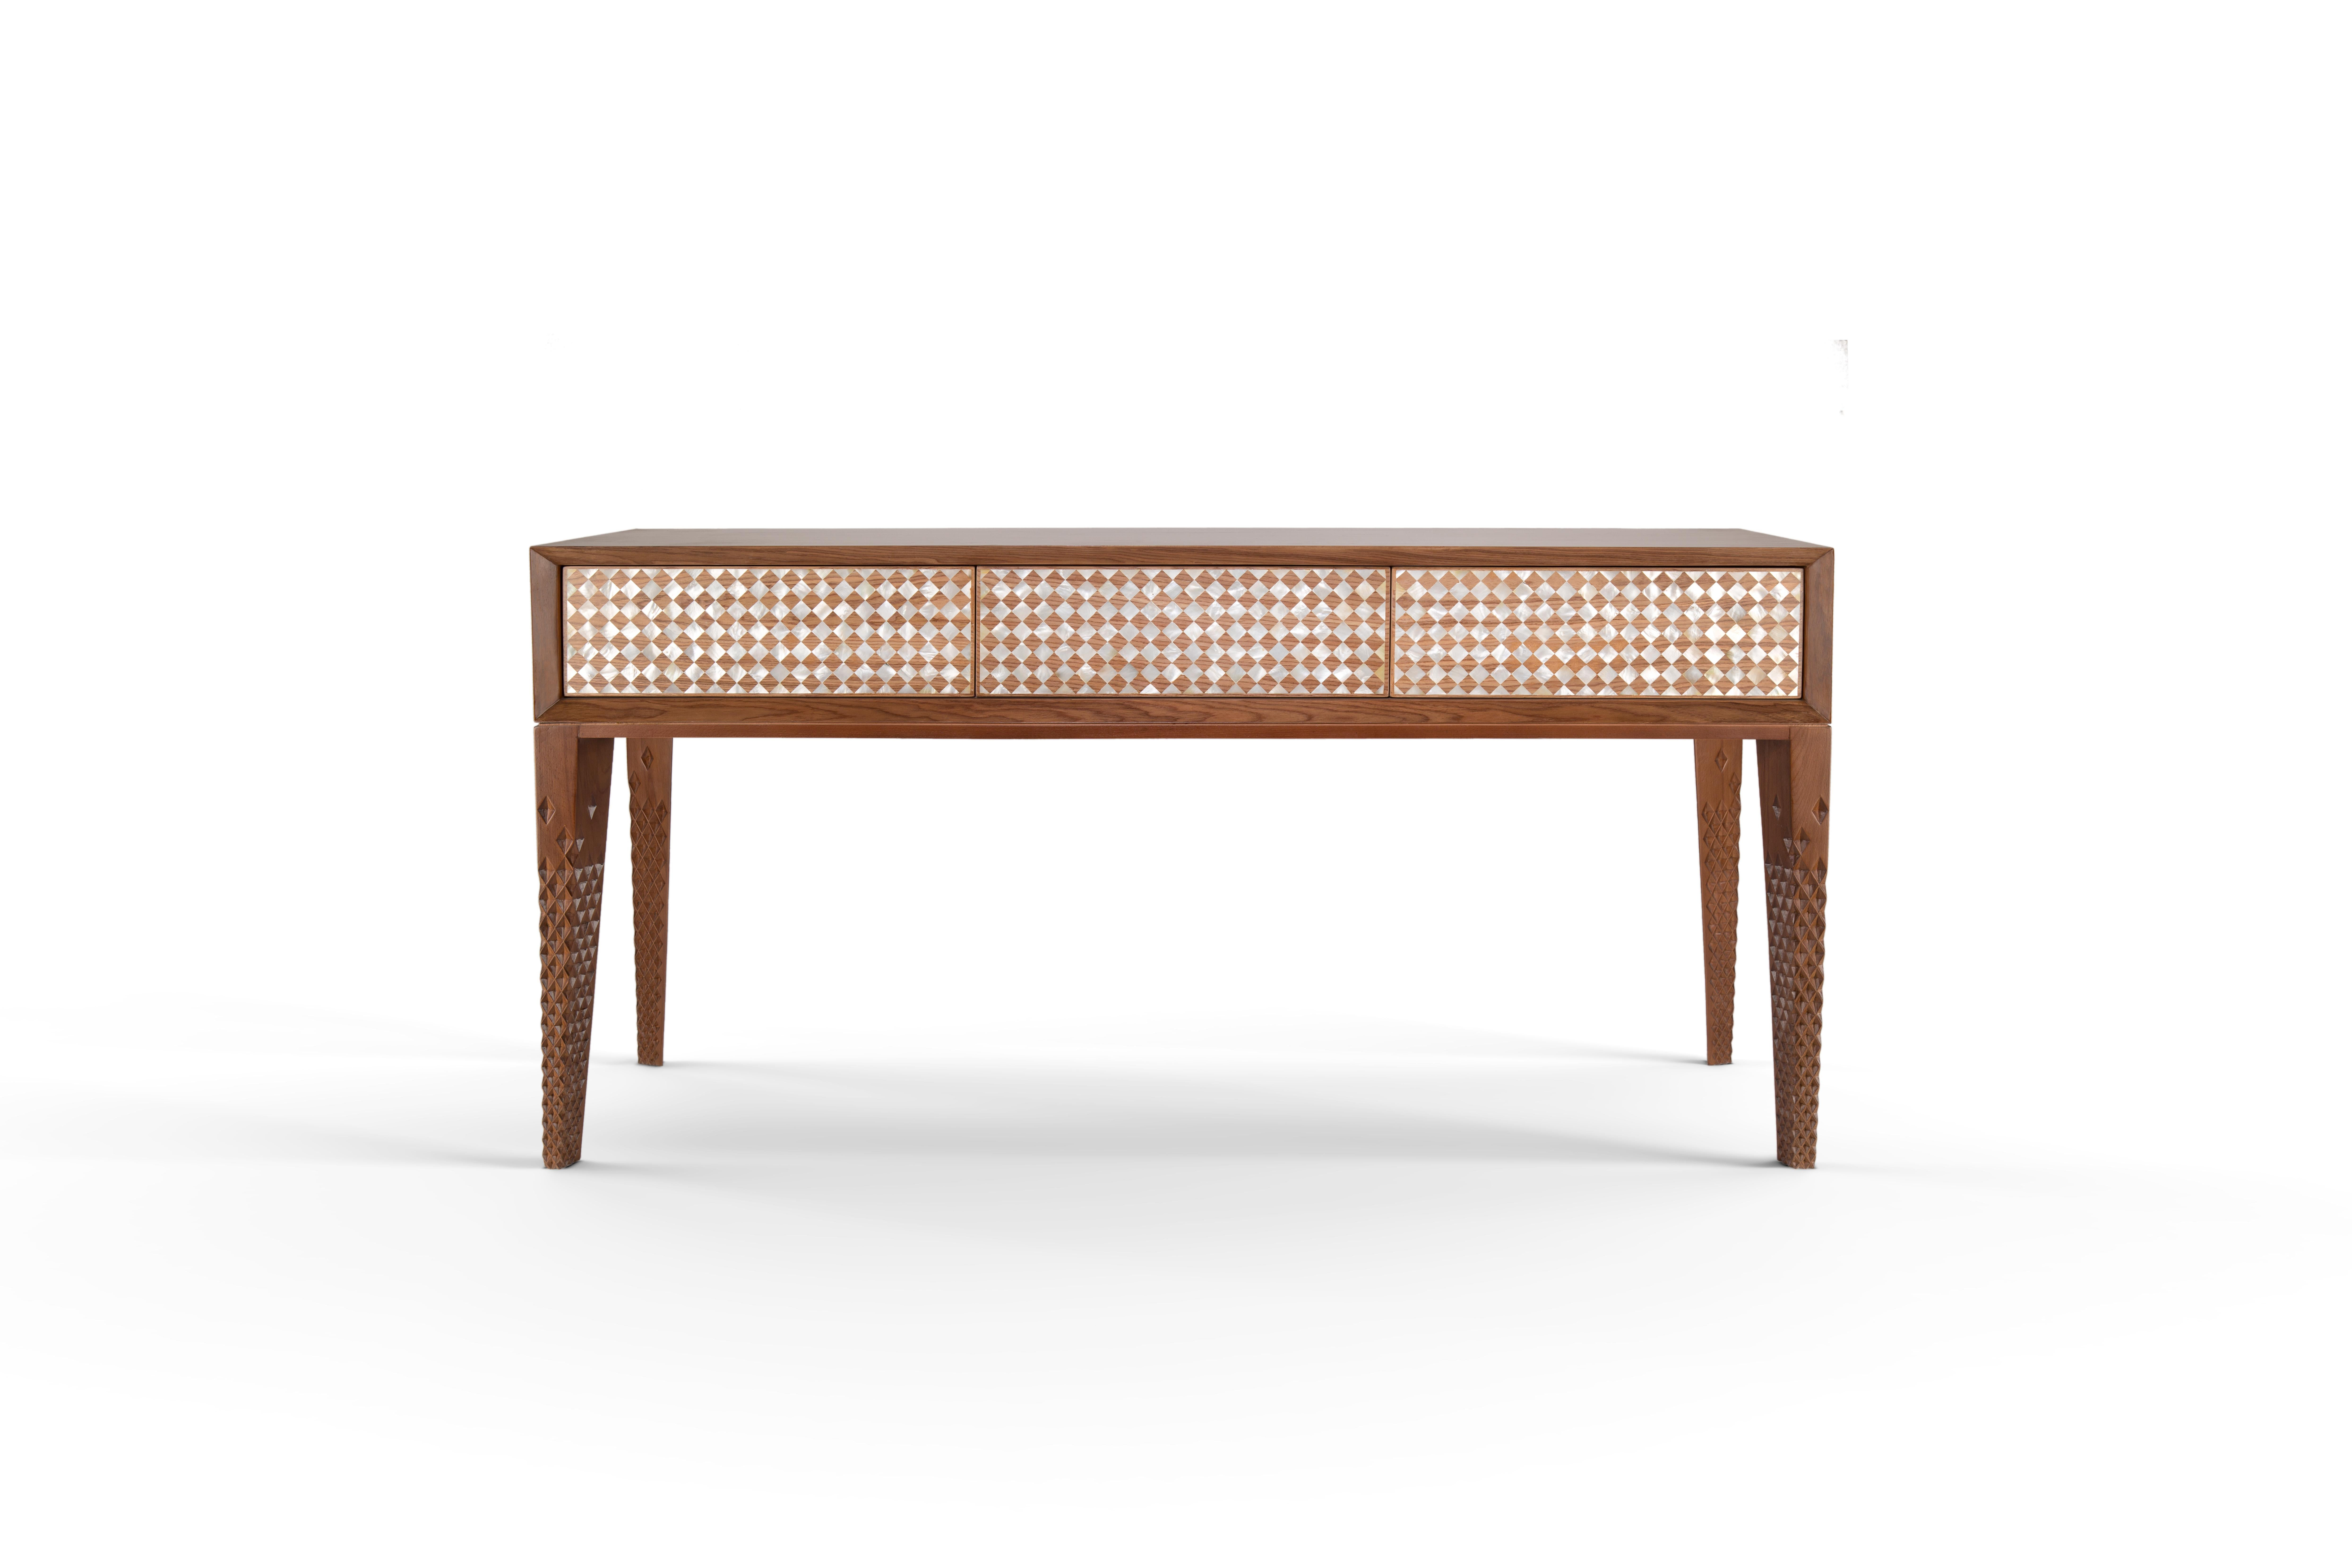 Hand-Carved Walnut Console with Intricate Mother-of-pearl Geometric Design.
If you are looking to add glamour to your entrance, our bespoke Beautiful Geometry console is a must-add piece to your place. It is made from Walnut veneer for the top and